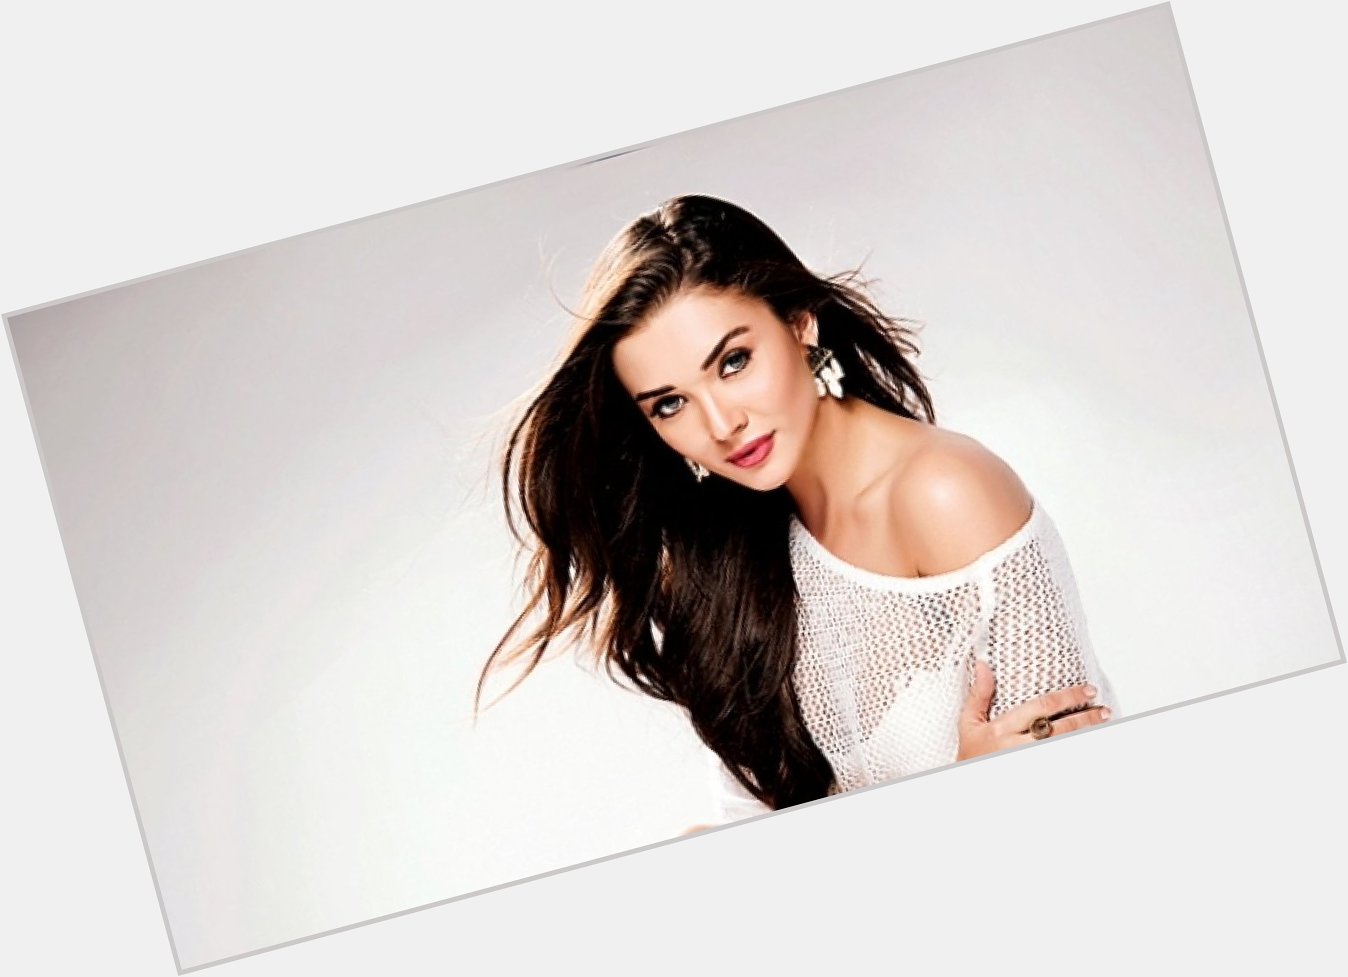 Join us in Wishing a very happy birthday to Amy Jackson  